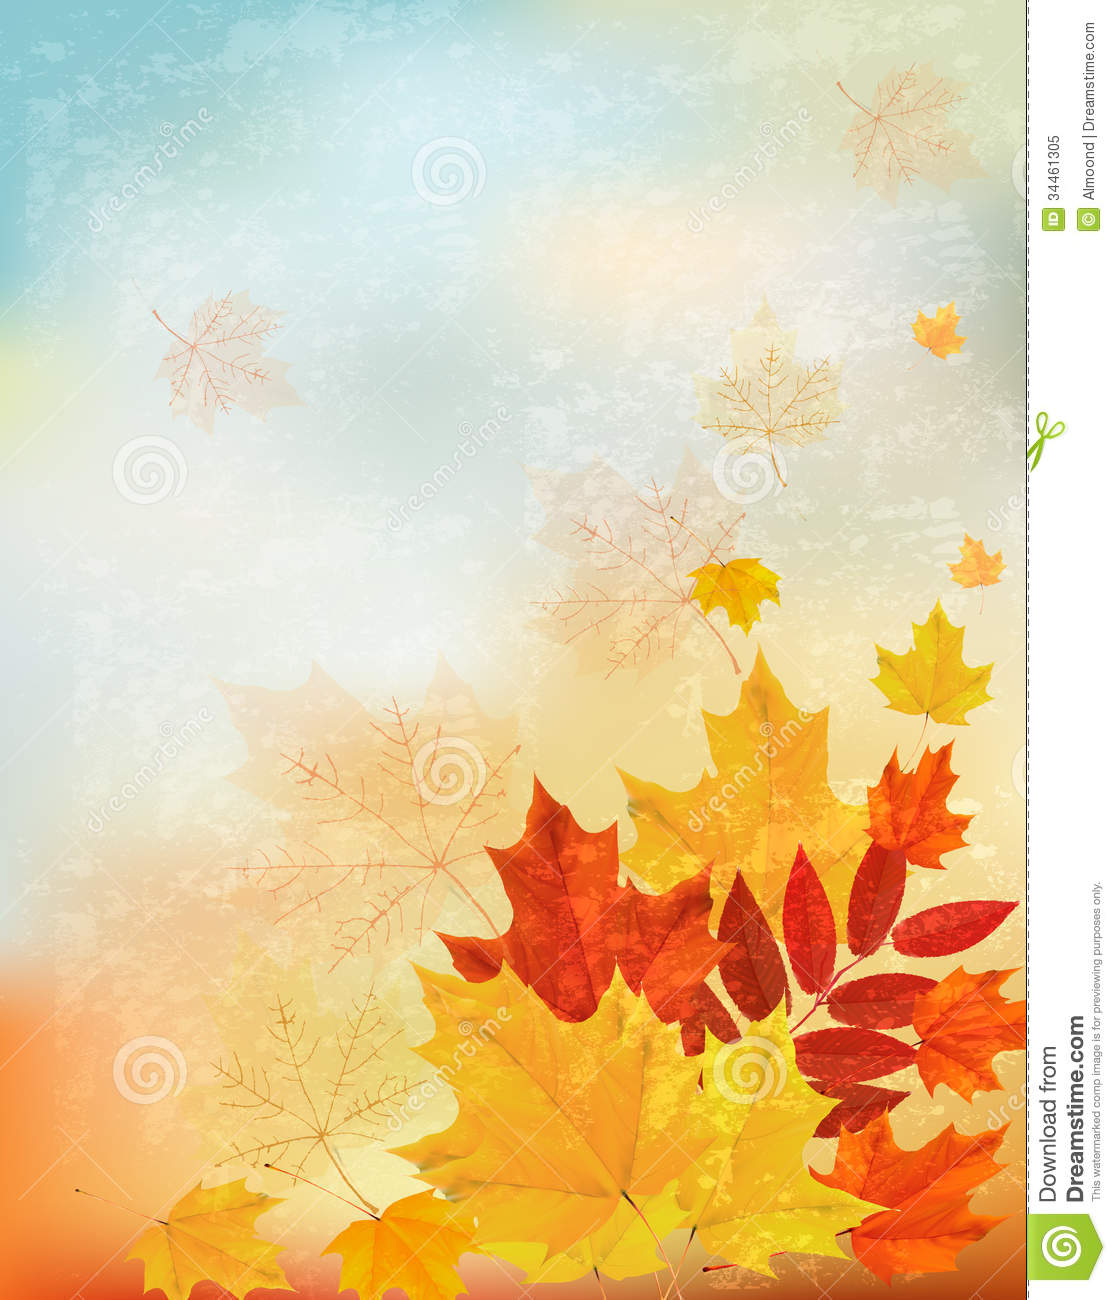 Free Fall Autumn Abstract Backgrounds